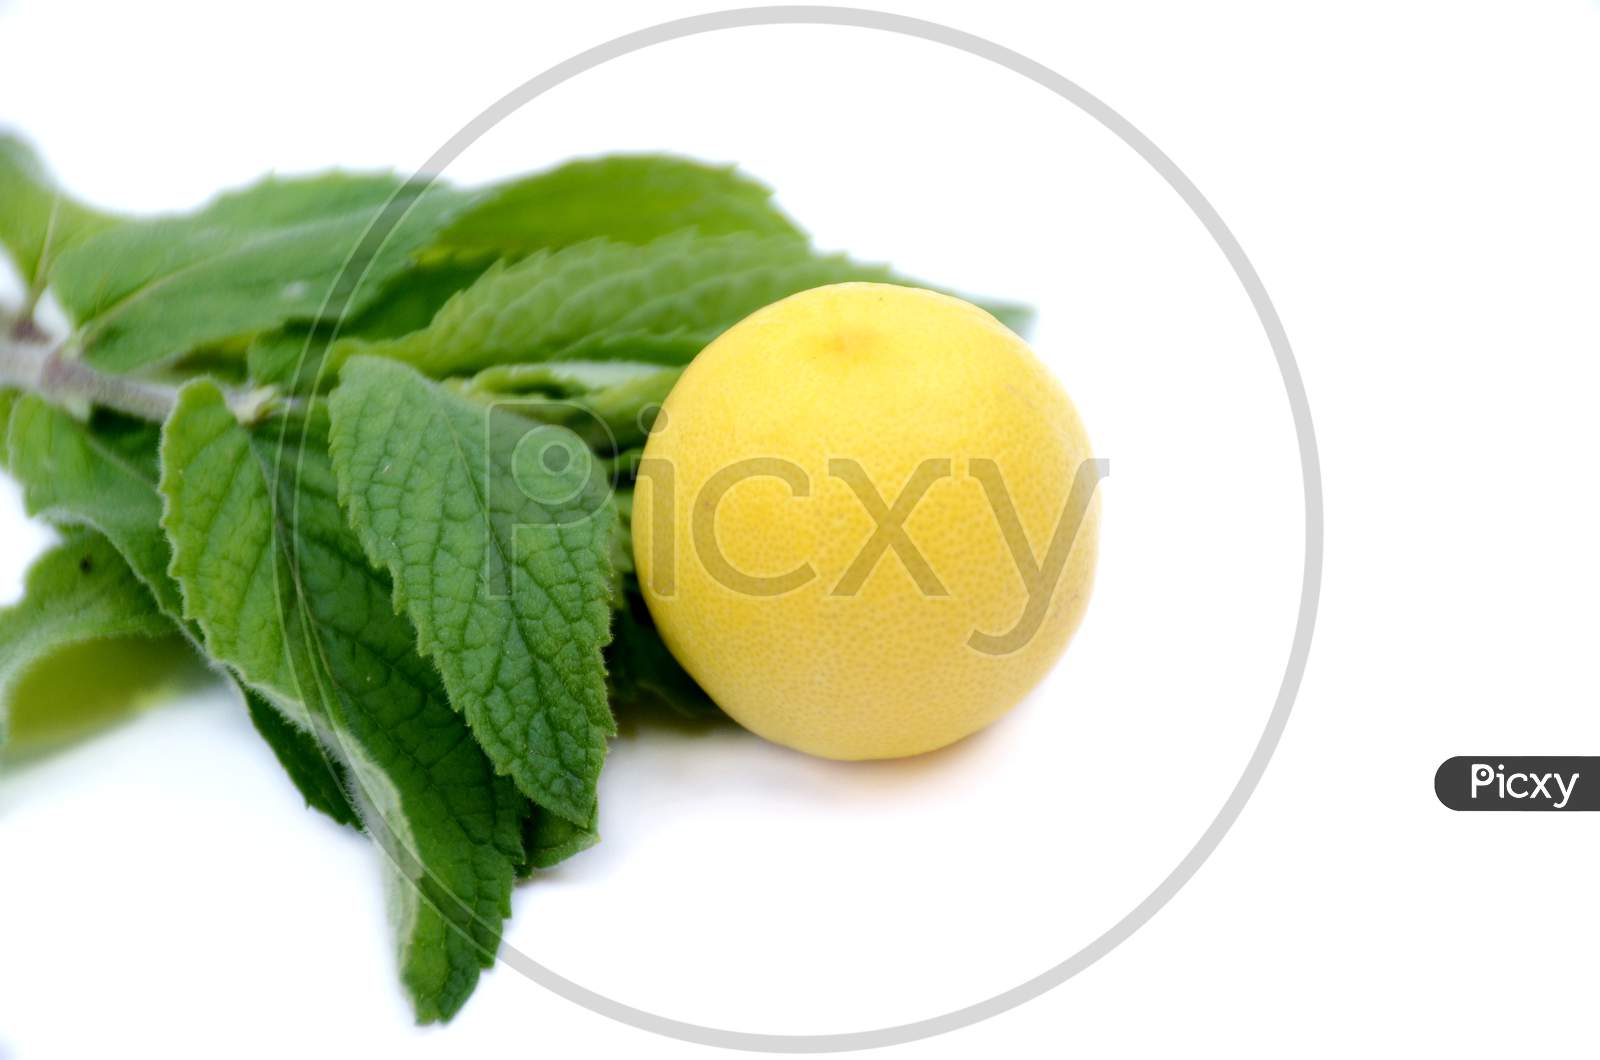 the yellow lamon with green mint isolated on white background.